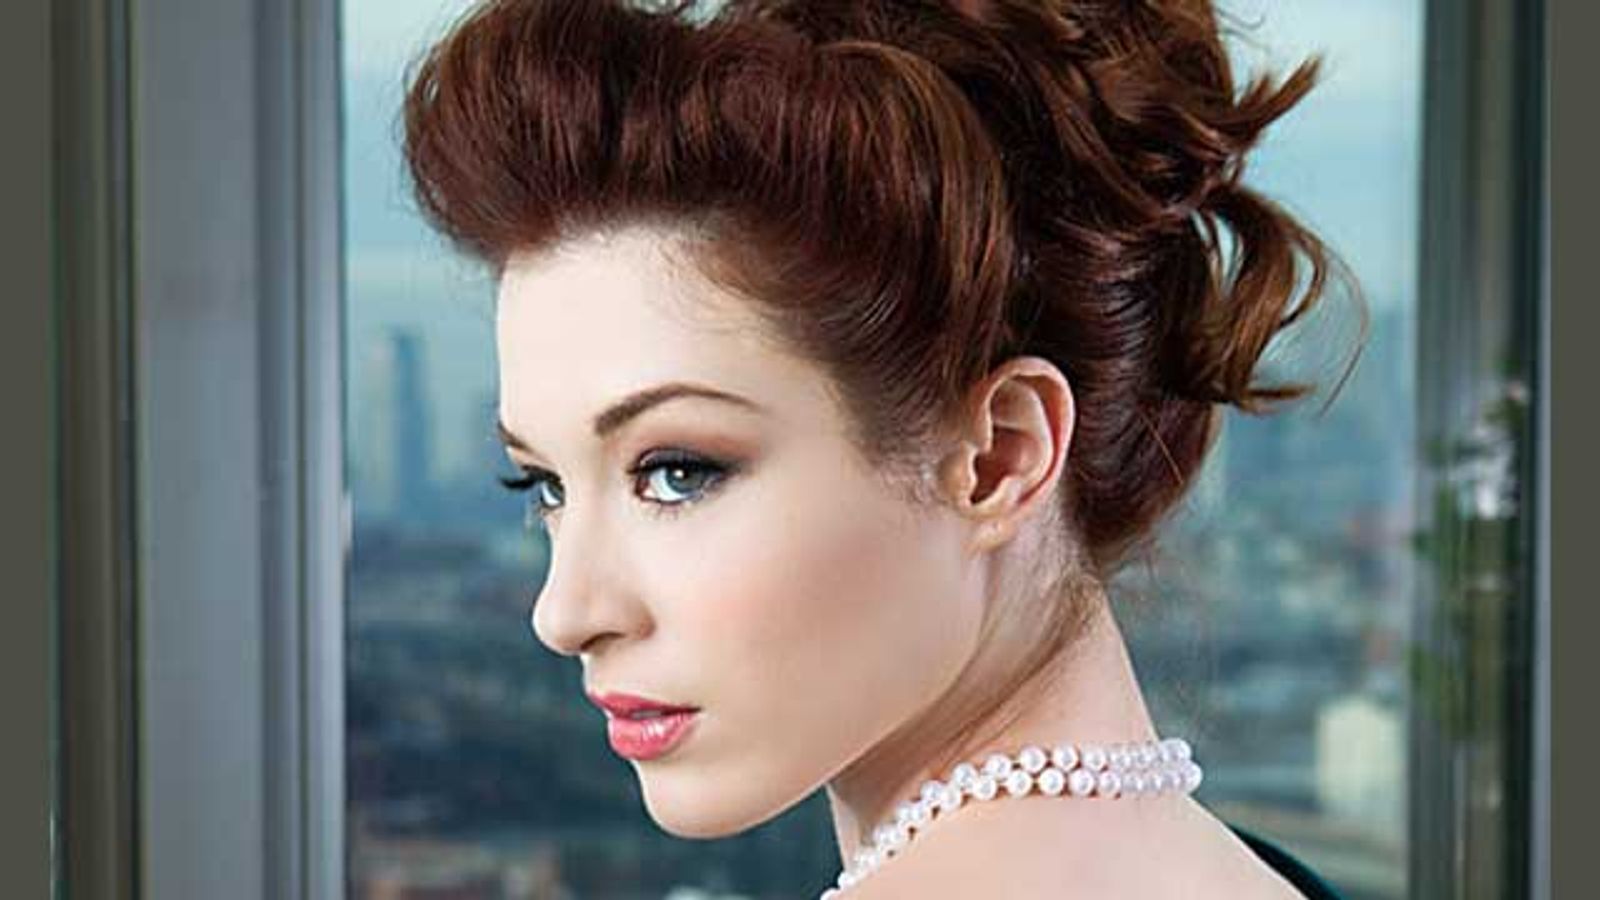 Stoya Sexes Up 'Penthouse' With 'Mad Men'-Inspired Pictorial